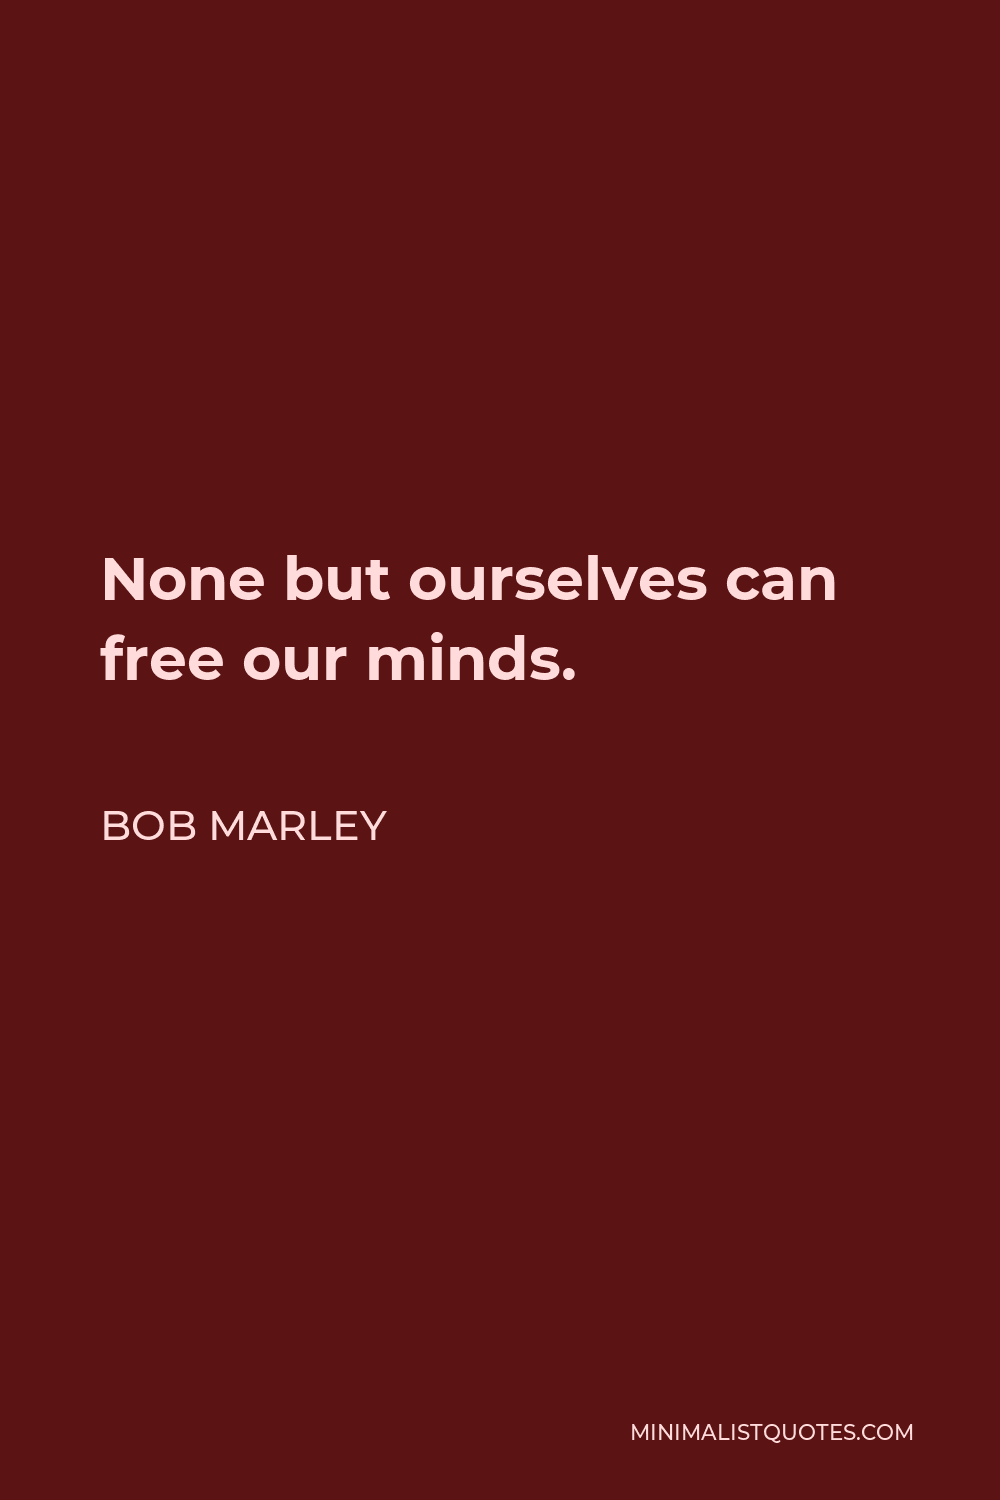 Bob Marley Quote - None but ourselves can free our minds.